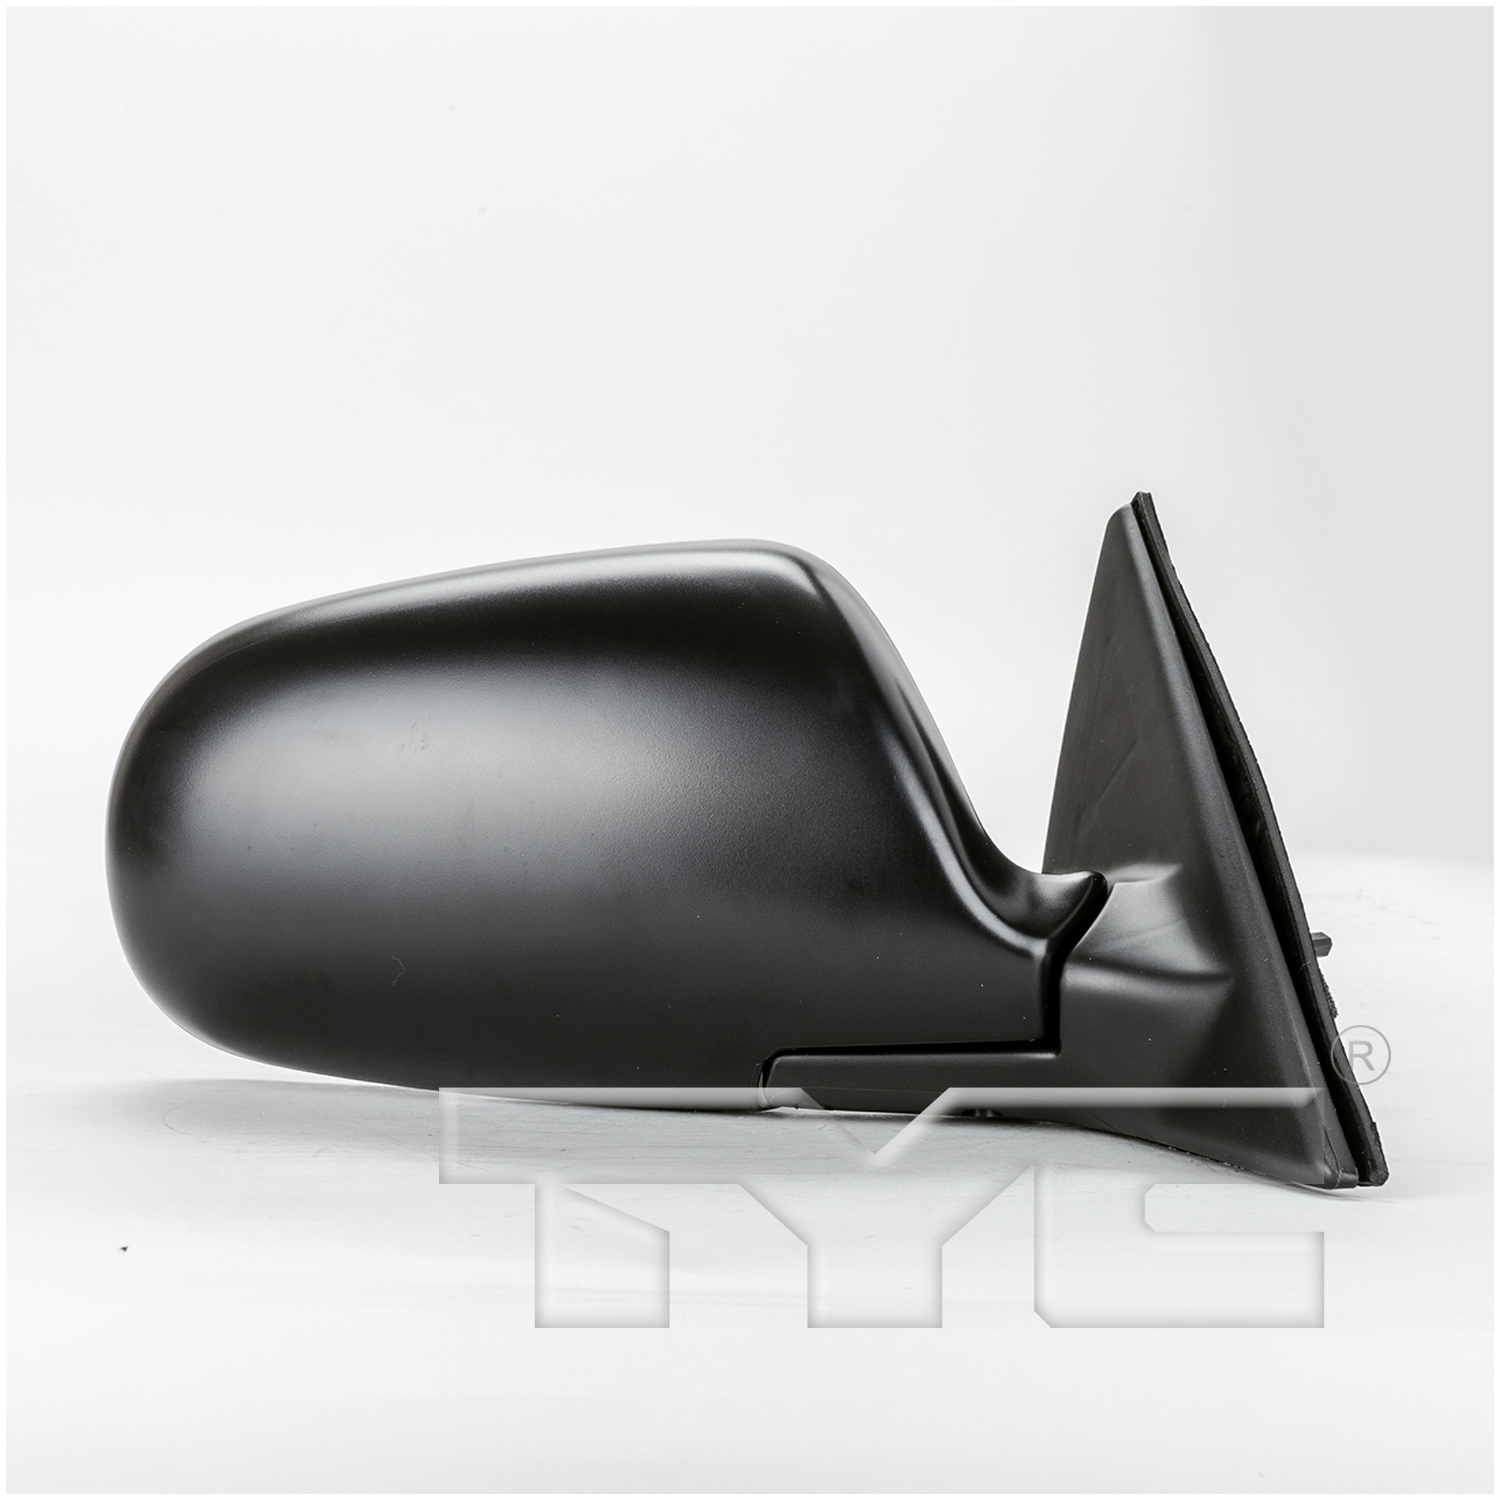 Aftermarket MIRRORS for HONDA - ACCORD, ACCORD,93-93,RT Mirror outside rear view